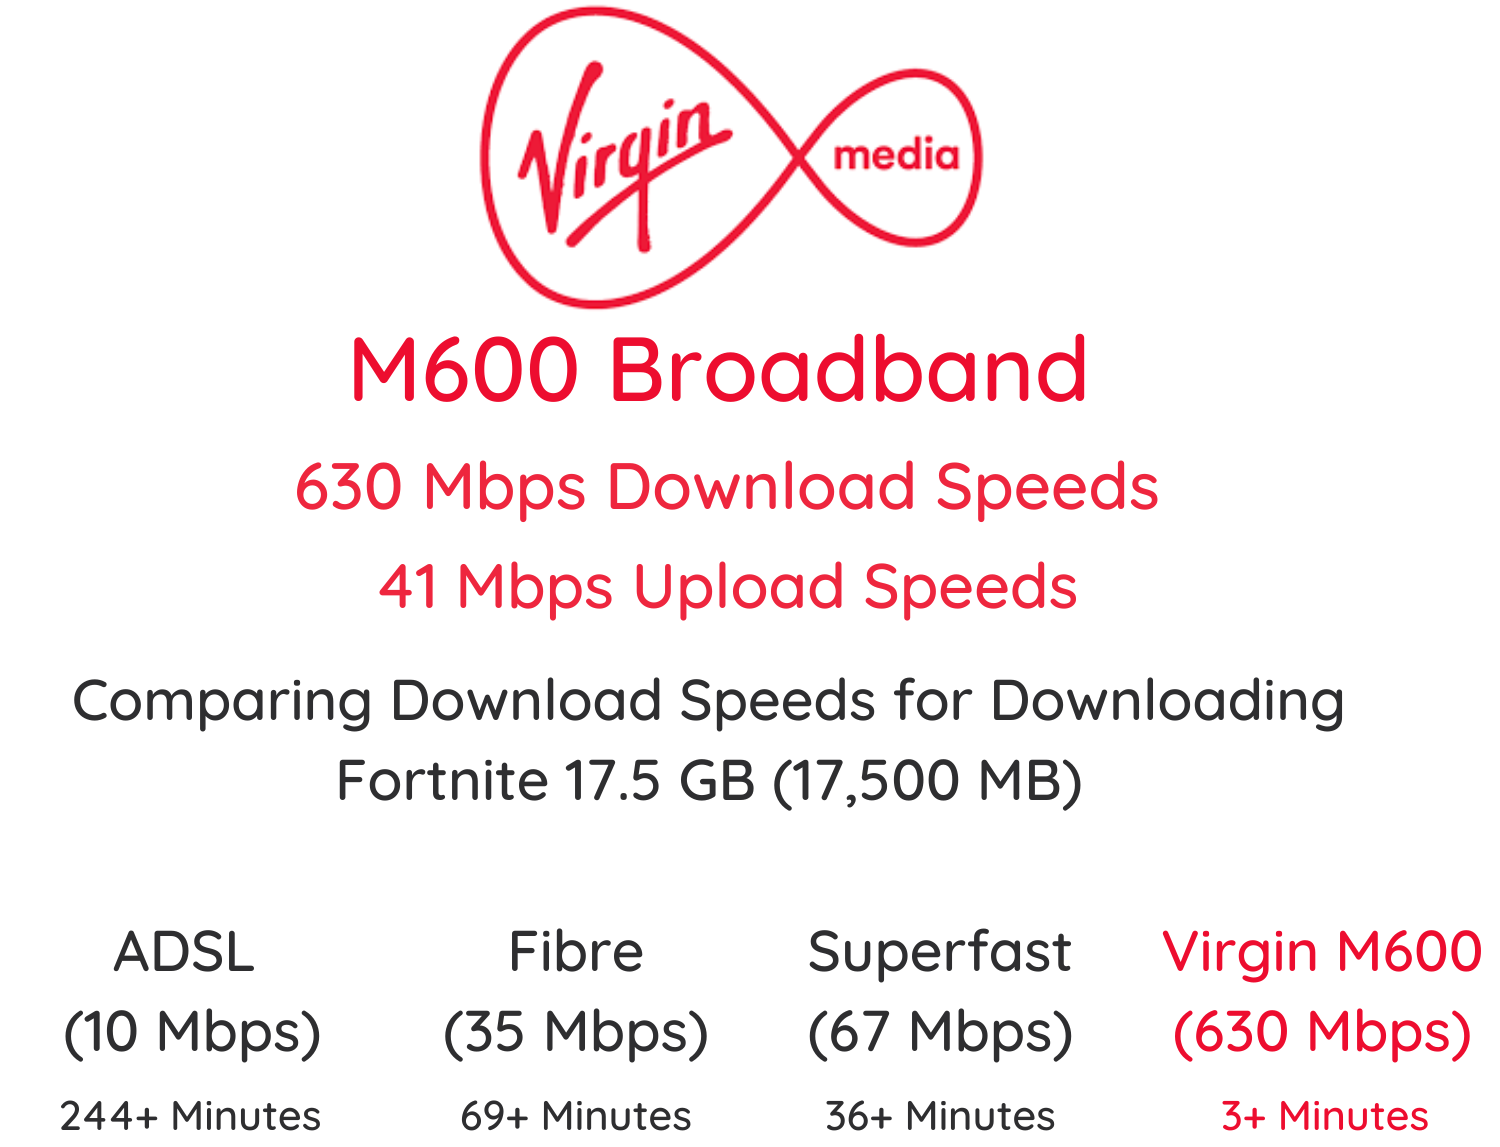 Virgin Media M600 offers 630 Mbps download speeds and 41 Mbps upload speeds and is available in several UK cities including London, Manchester, Liverpool, Leicester, Birmingham, Leeds, and Glasgow.